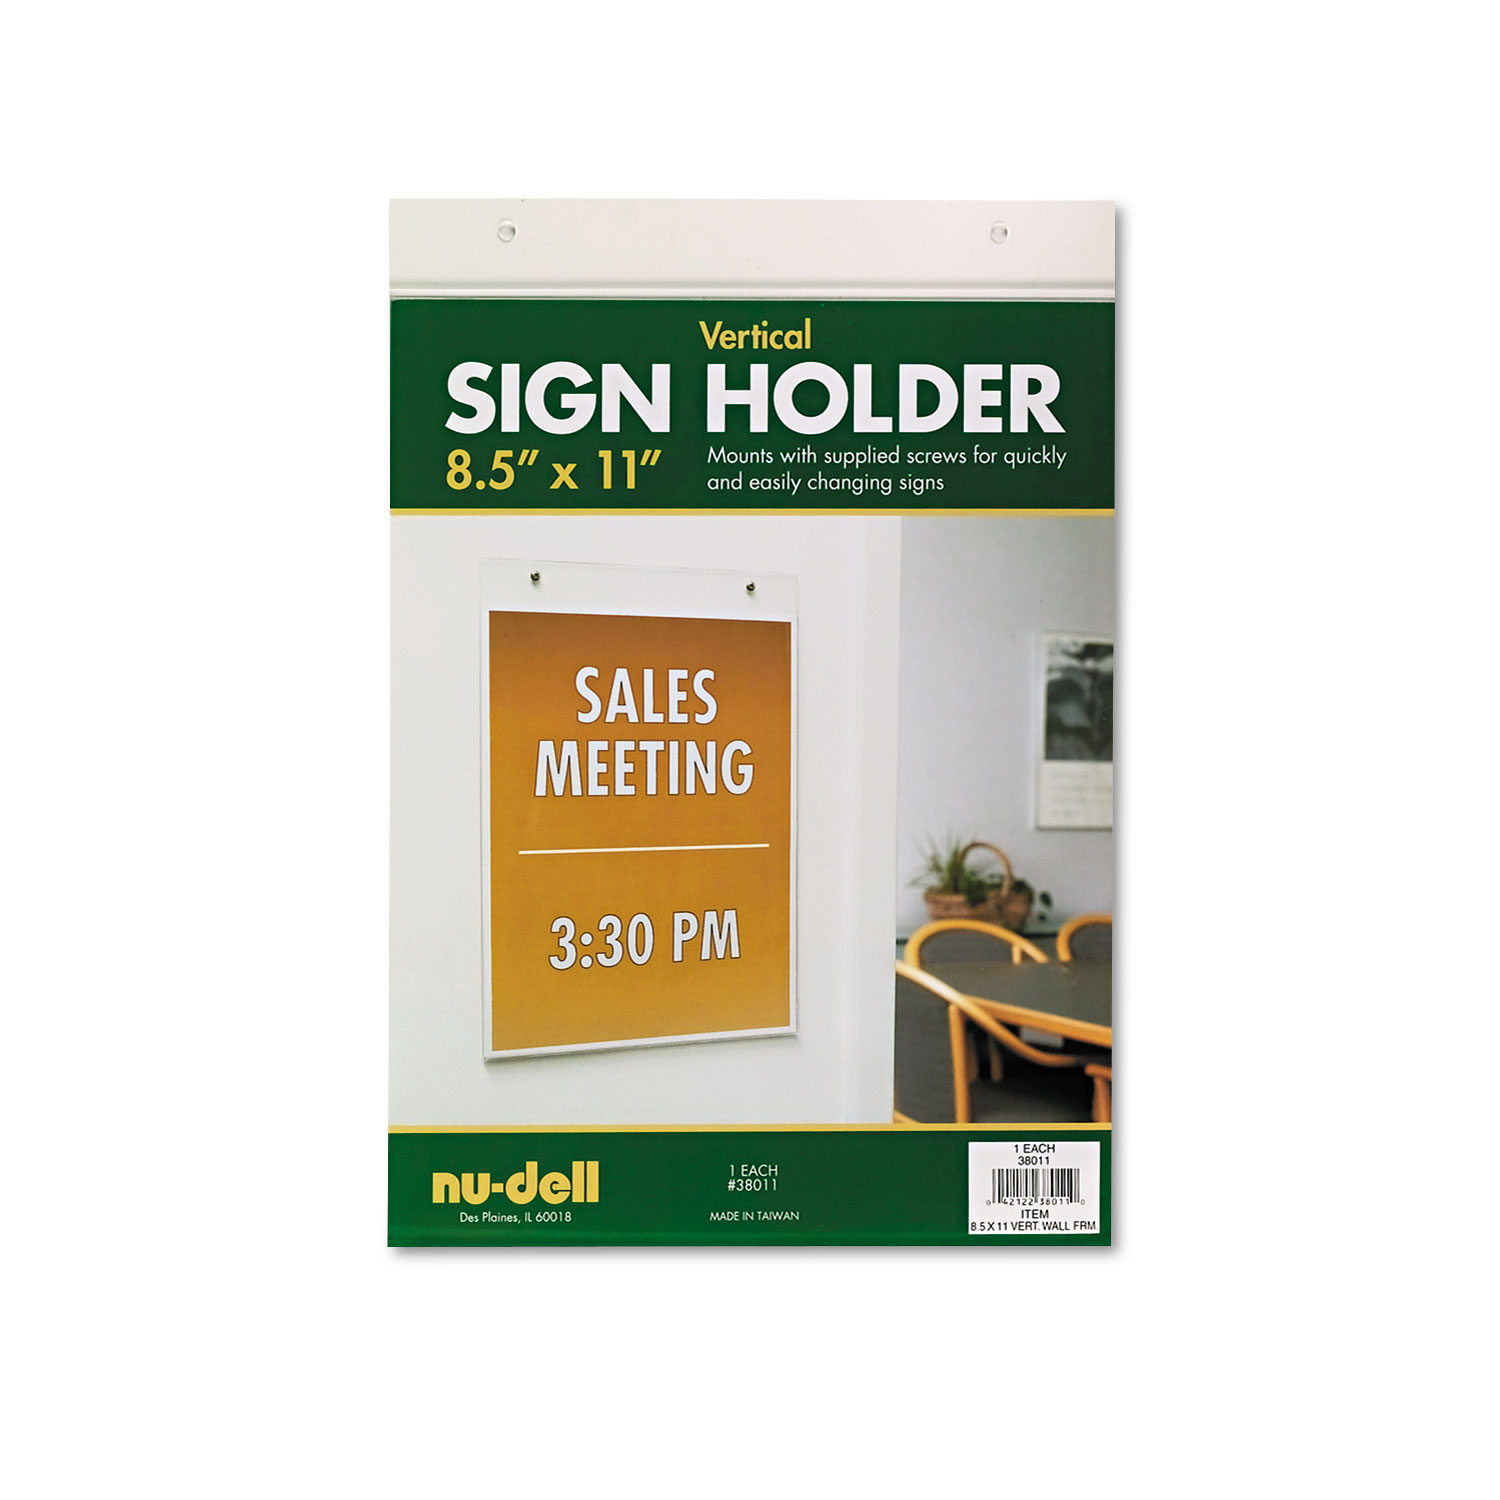  NuDell NUD38011 Acrylic Sign Holder, Vertical, 8 1/2 x 11, Clear (NUD38011) 